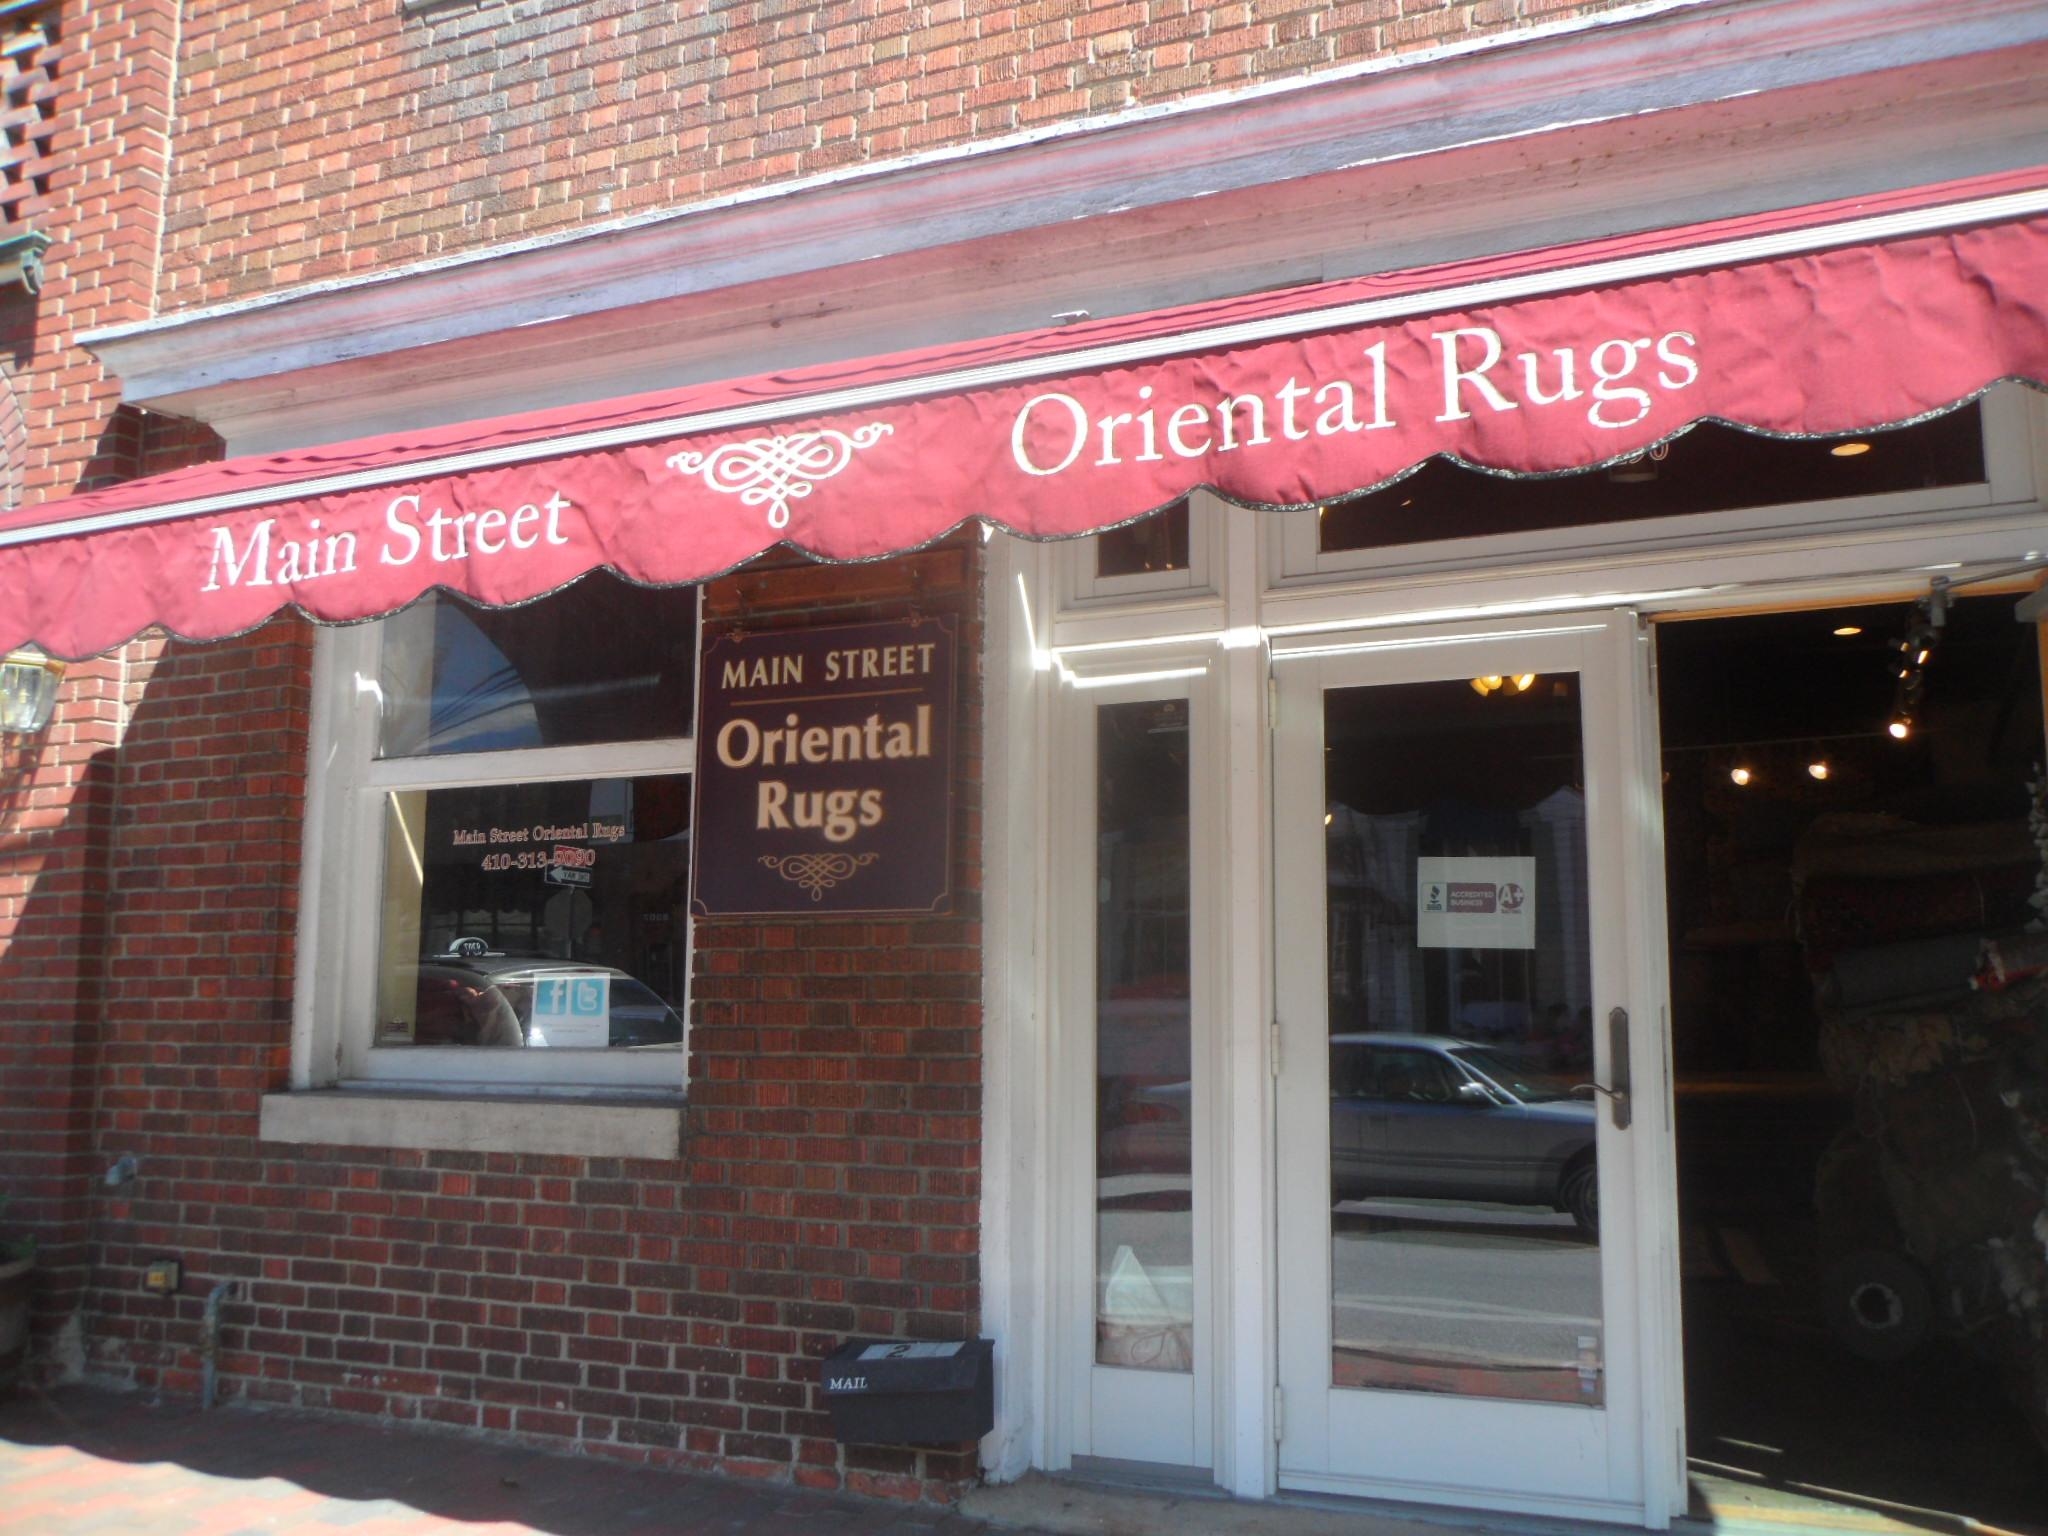 The best Oriental Rugs in Maryland!